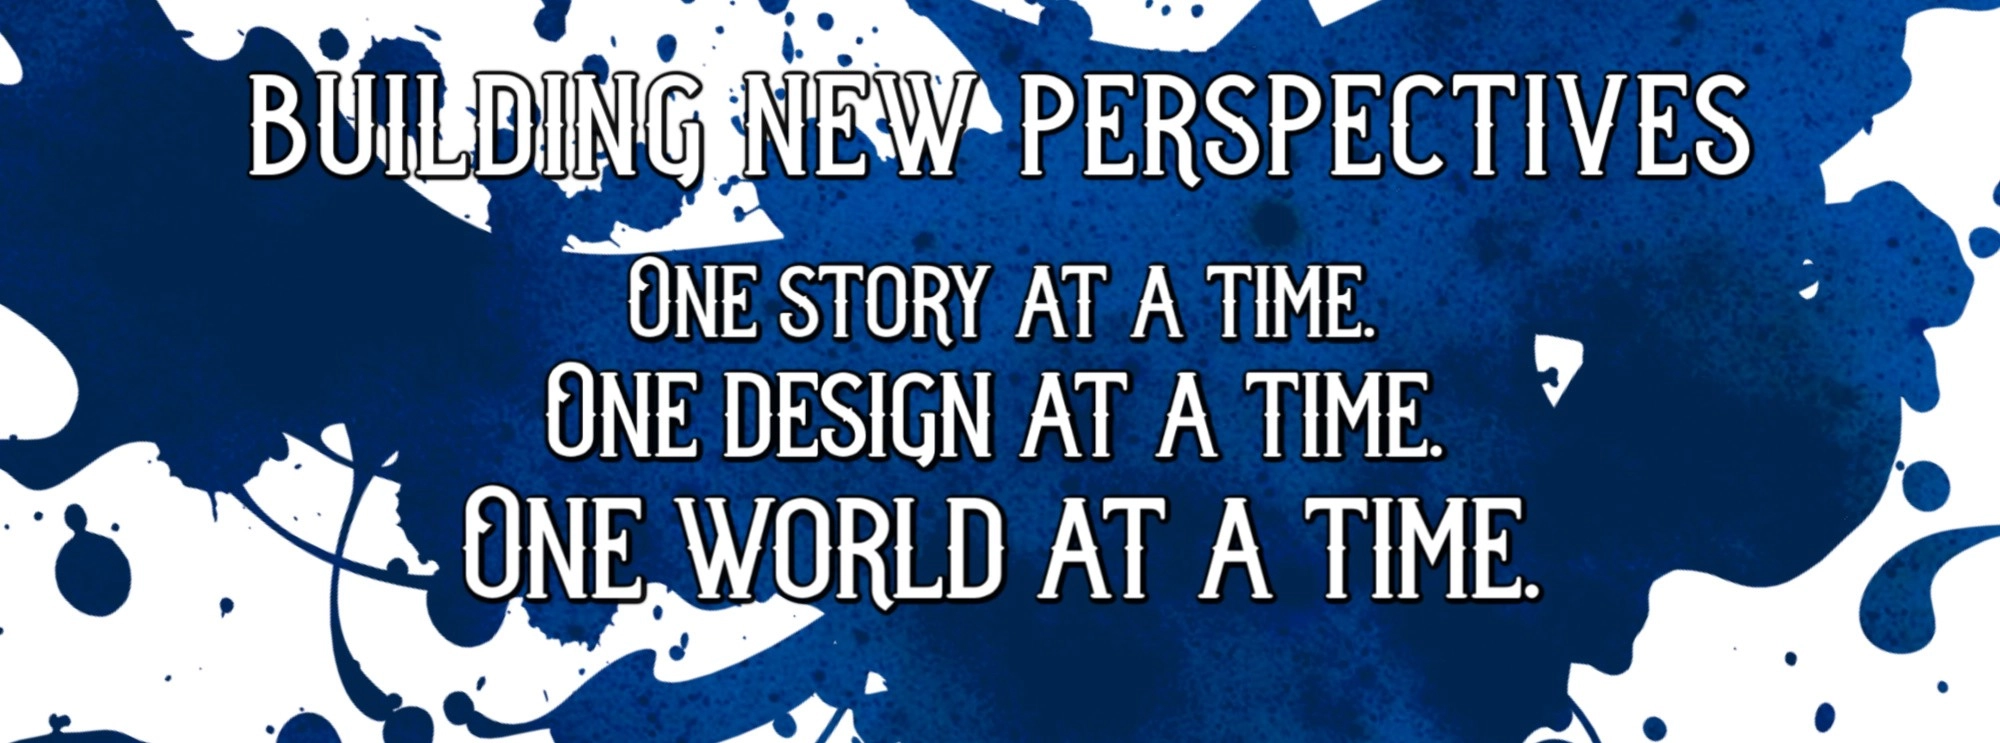 Building new perspectives one story at a time, one design at a time, and one world at a time.